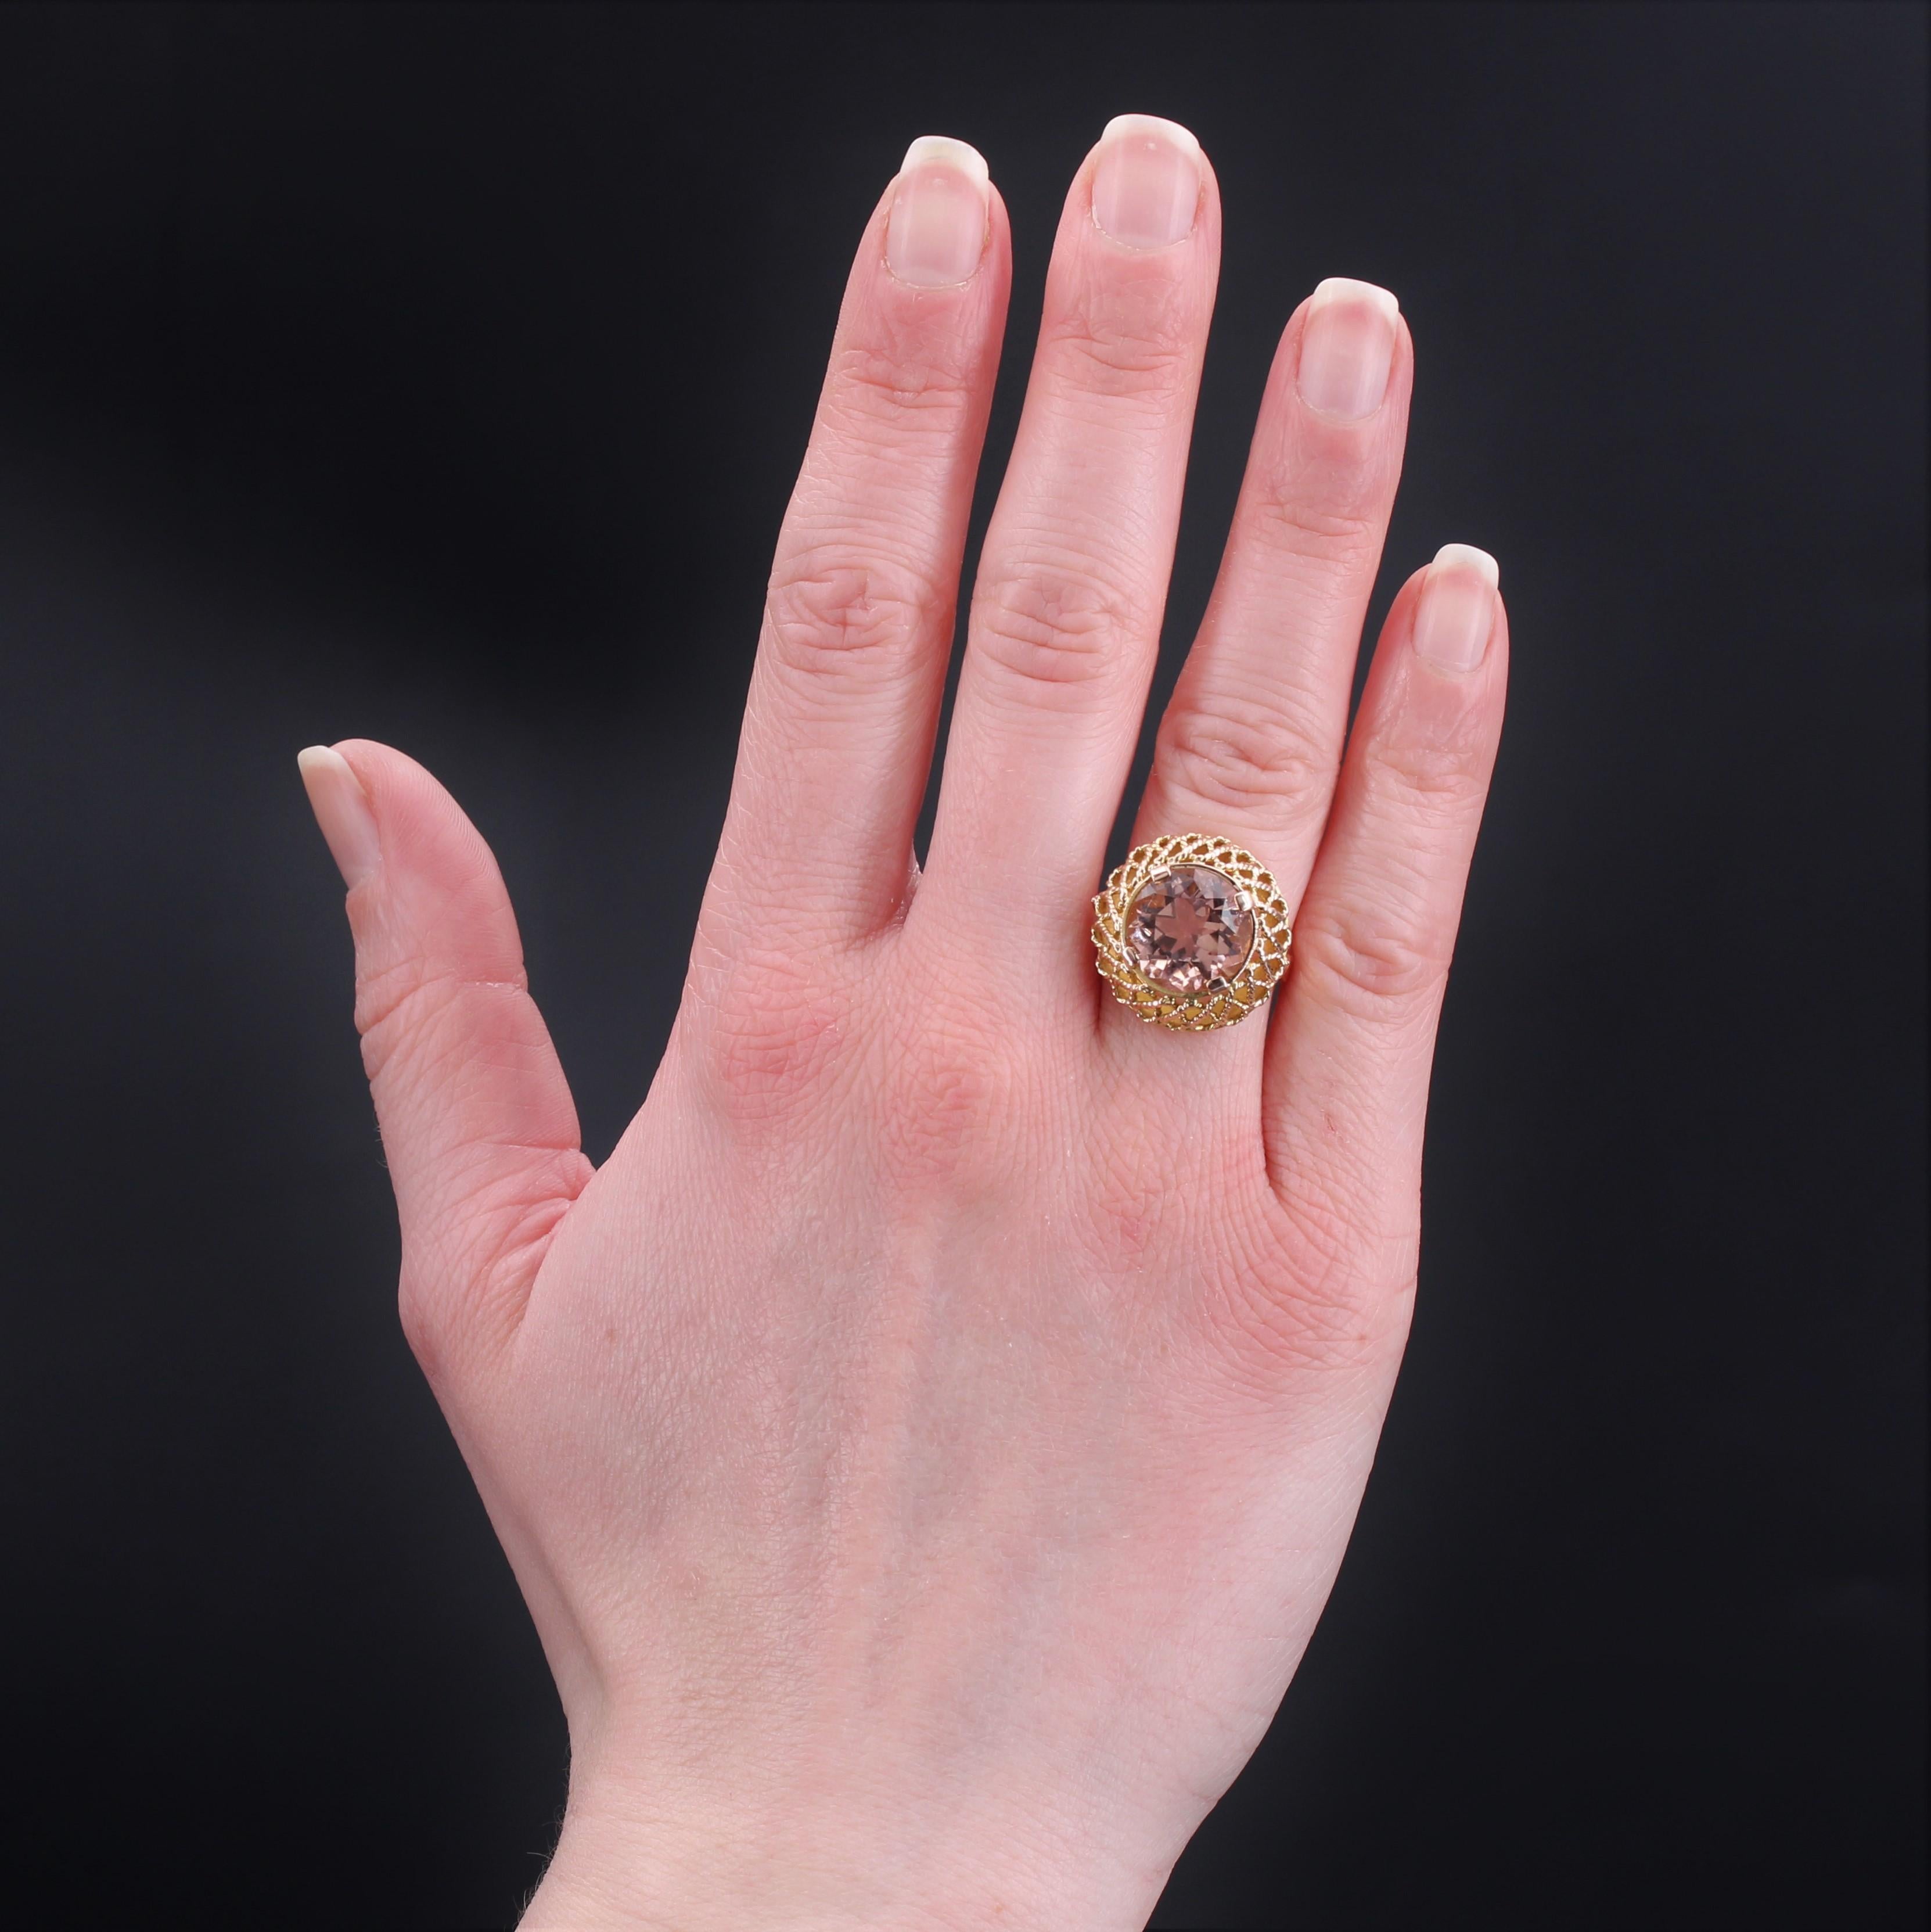 Ring in 18 karat rose gold, eagle head hallmark.
The setting of this retro ring is round and made with small cords of gold twisted in the center an important morganite round and held to 4 flat claws.
Weight of the morganite : 5.42 carats